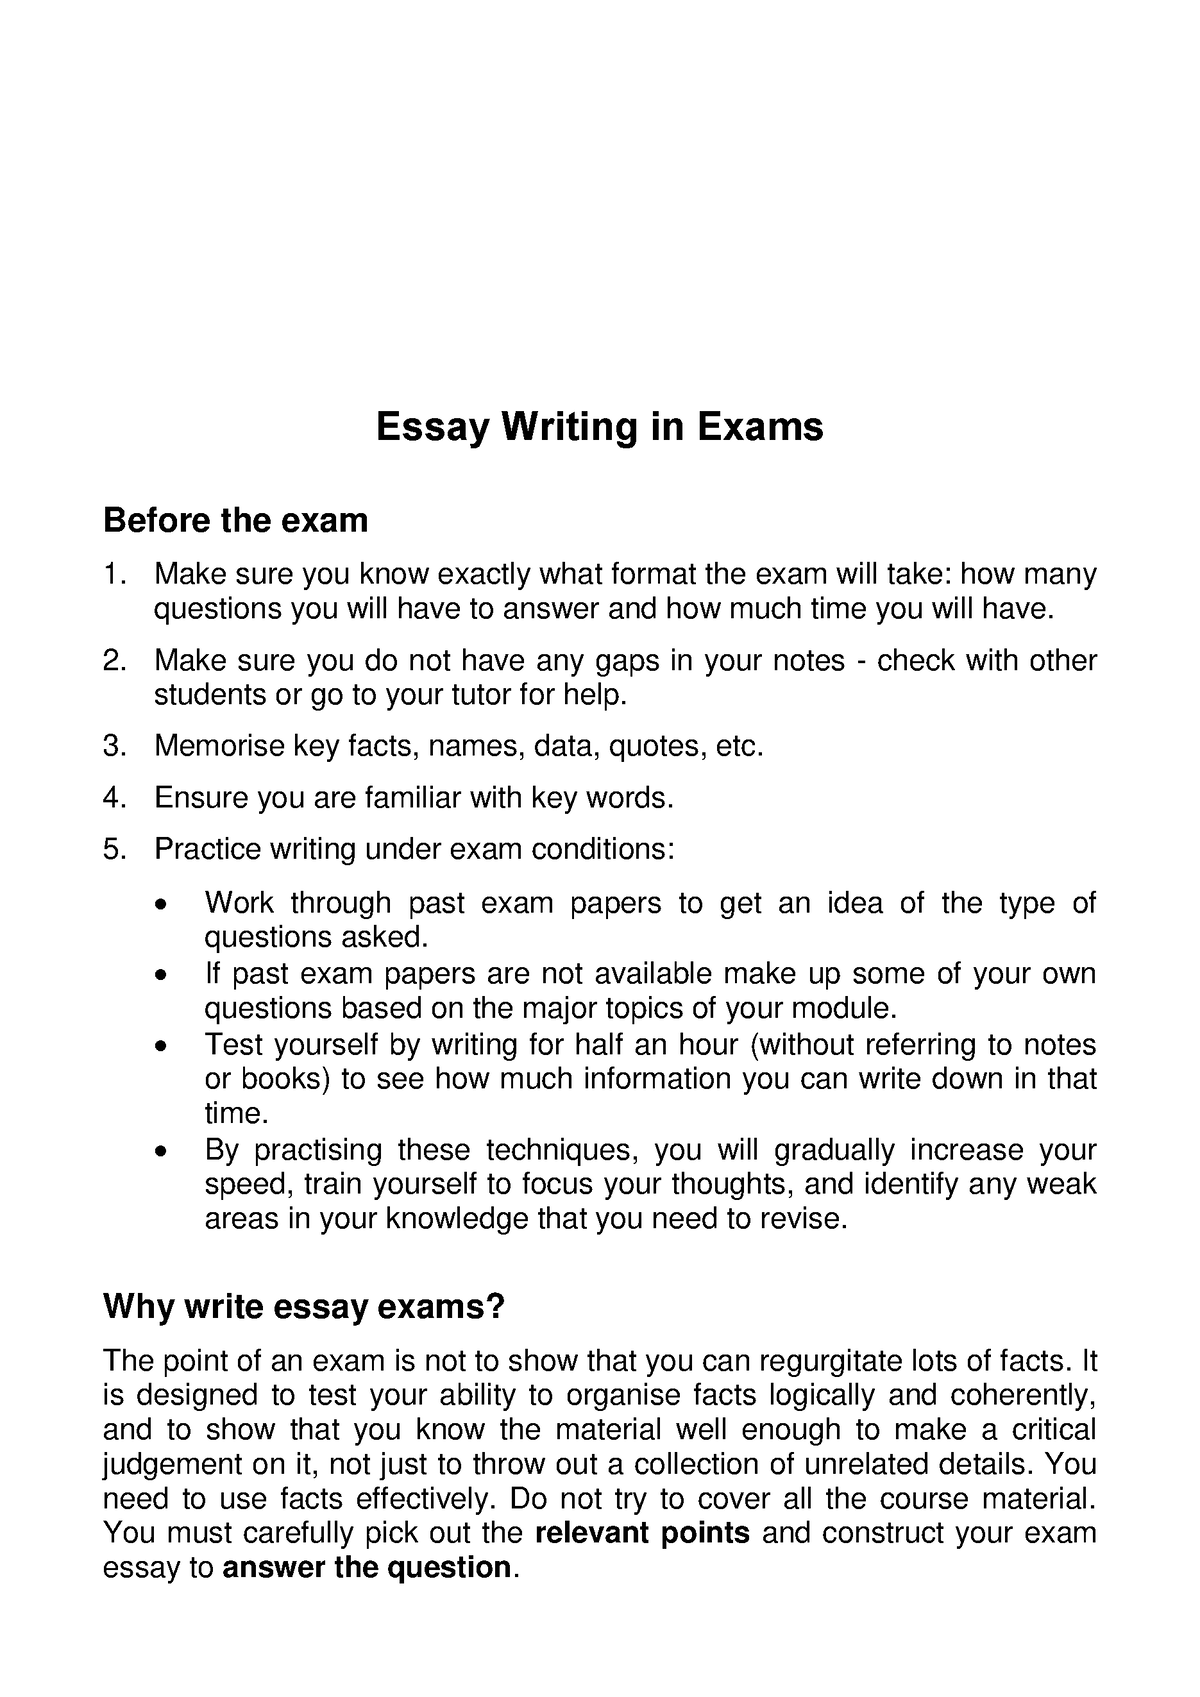 essay about exams are important